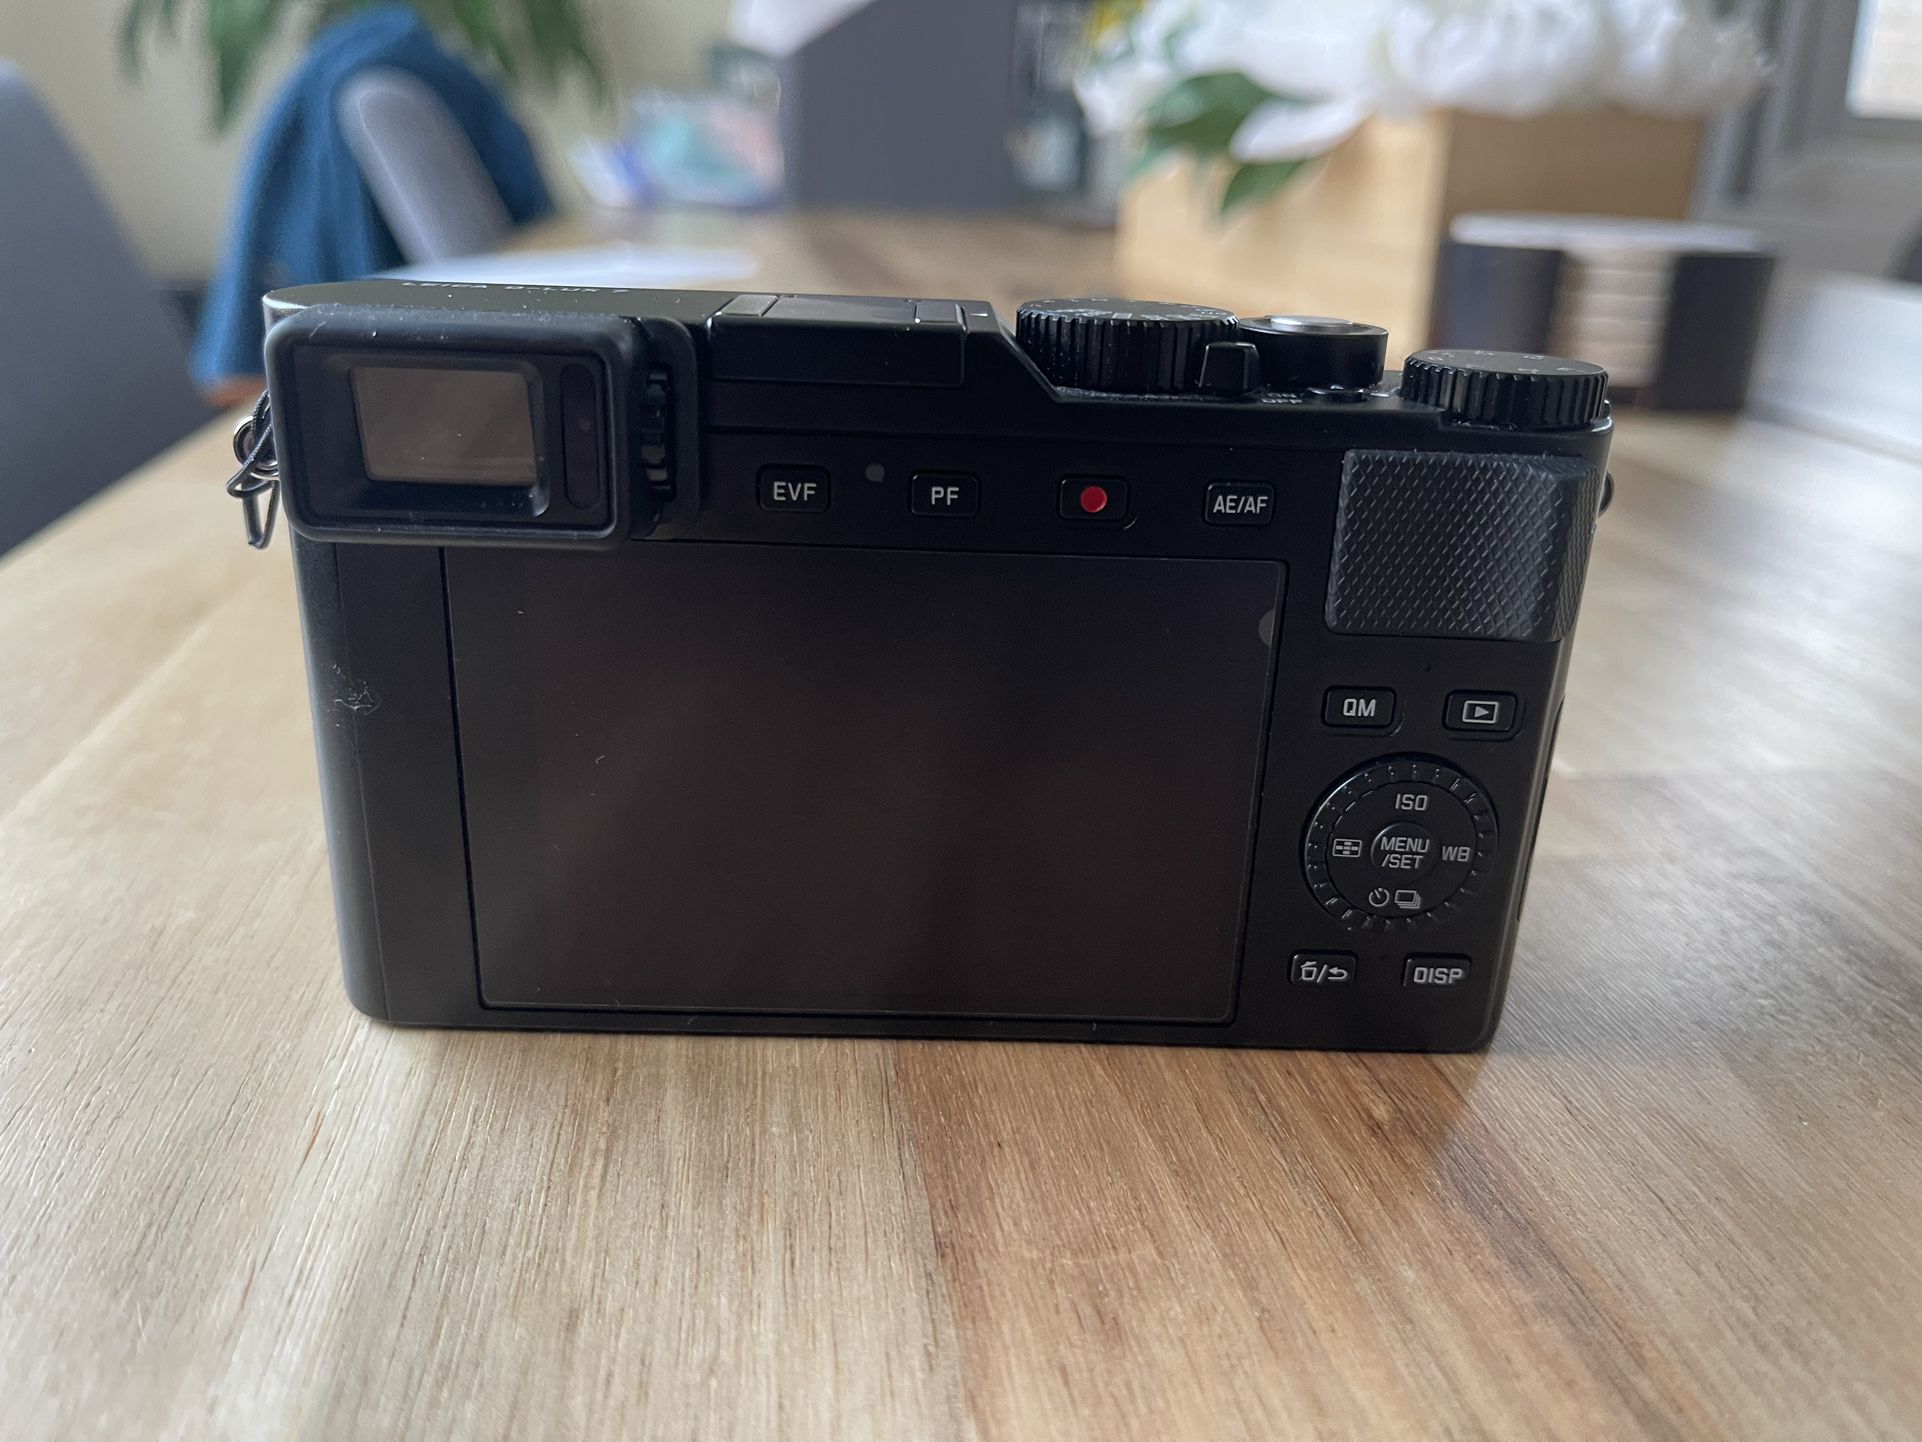 Leica D-lux 7 Digital Camera for Sale in Los Angeles, CA - OfferUp